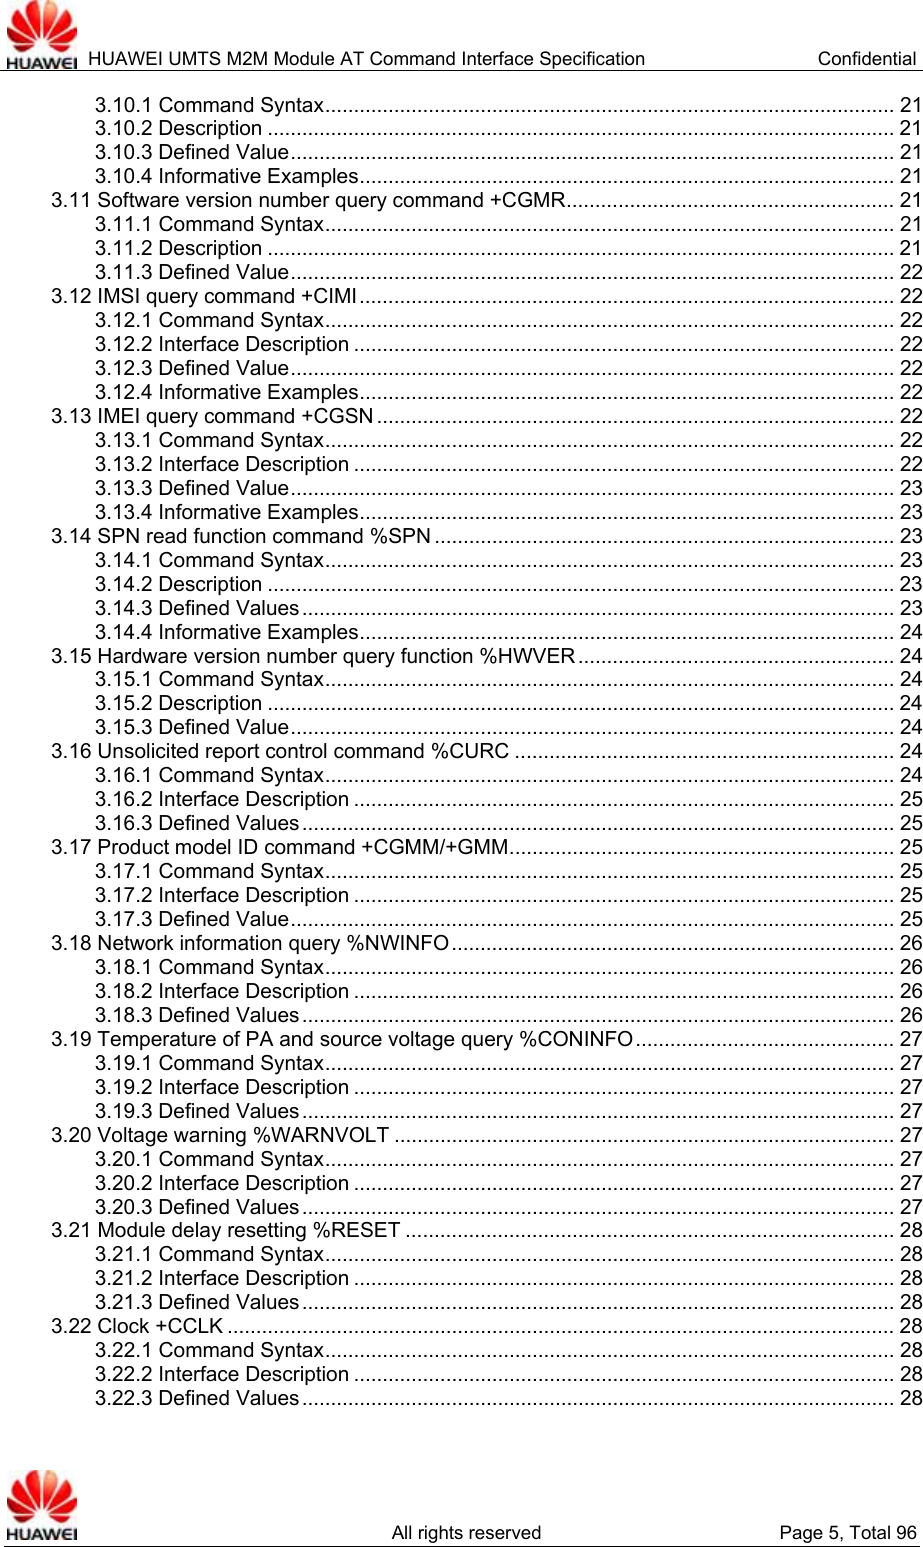  HUAWEI UMTS M2M Module AT Command Interface Specification  Confidential   All rights reserved  Page 5, Total 96 3.10.1 Command Syntax................................................................................................... 21 3.10.2 Description ............................................................................................................. 21 3.10.3 Defined Value......................................................................................................... 21 3.10.4 Informative Examples............................................................................................. 21 3.11 Software version number query command +CGMR......................................................... 21 3.11.1 Command Syntax................................................................................................... 21 3.11.2 Description ............................................................................................................. 21 3.11.3 Defined Value......................................................................................................... 22 3.12 IMSI query command +CIMI............................................................................................. 22 3.12.1 Command Syntax................................................................................................... 22 3.12.2 Interface Description .............................................................................................. 22 3.12.3 Defined Value......................................................................................................... 22 3.12.4 Informative Examples............................................................................................. 22 3.13 IMEI query command +CGSN .......................................................................................... 22 3.13.1 Command Syntax................................................................................................... 22 3.13.2 Interface Description .............................................................................................. 22 3.13.3 Defined Value......................................................................................................... 23 3.13.4 Informative Examples............................................................................................. 23 3.14 SPN read function command %SPN ................................................................................ 23 3.14.1 Command Syntax................................................................................................... 23 3.14.2 Description ............................................................................................................. 23 3.14.3 Defined Values....................................................................................................... 23 3.14.4 Informative Examples............................................................................................. 24 3.15 Hardware version number query function %HWVER....................................................... 24 3.15.1 Command Syntax................................................................................................... 24 3.15.2 Description ............................................................................................................. 24 3.15.3 Defined Value......................................................................................................... 24 3.16 Unsolicited report control command %CURC .................................................................. 24 3.16.1 Command Syntax................................................................................................... 24 3.16.2 Interface Description .............................................................................................. 25 3.16.3 Defined Values....................................................................................................... 25 3.17 Product model ID command +CGMM/+GMM................................................................... 25 3.17.1 Command Syntax................................................................................................... 25 3.17.2 Interface Description .............................................................................................. 25 3.17.3 Defined Value......................................................................................................... 25 3.18 Network information query %NWINFO............................................................................. 26 3.18.1 Command Syntax................................................................................................... 26 3.18.2 Interface Description .............................................................................................. 26 3.18.3 Defined Values....................................................................................................... 26 3.19 Temperature of PA and source voltage query %CONINFO............................................. 27 3.19.1 Command Syntax................................................................................................... 27 3.19.2 Interface Description .............................................................................................. 27 3.19.3 Defined Values....................................................................................................... 27 3.20 Voltage warning %WARNVOLT ....................................................................................... 27 3.20.1 Command Syntax................................................................................................... 27 3.20.2 Interface Description .............................................................................................. 27 3.20.3 Defined Values....................................................................................................... 27 3.21 Module delay resetting %RESET ..................................................................................... 28 3.21.1 Command Syntax................................................................................................... 28 3.21.2 Interface Description .............................................................................................. 28 3.21.3 Defined Values....................................................................................................... 28 3.22 Clock +CCLK .................................................................................................................... 28 3.22.1 Command Syntax................................................................................................... 28 3.22.2 Interface Description .............................................................................................. 28 3.22.3 Defined Values....................................................................................................... 28 